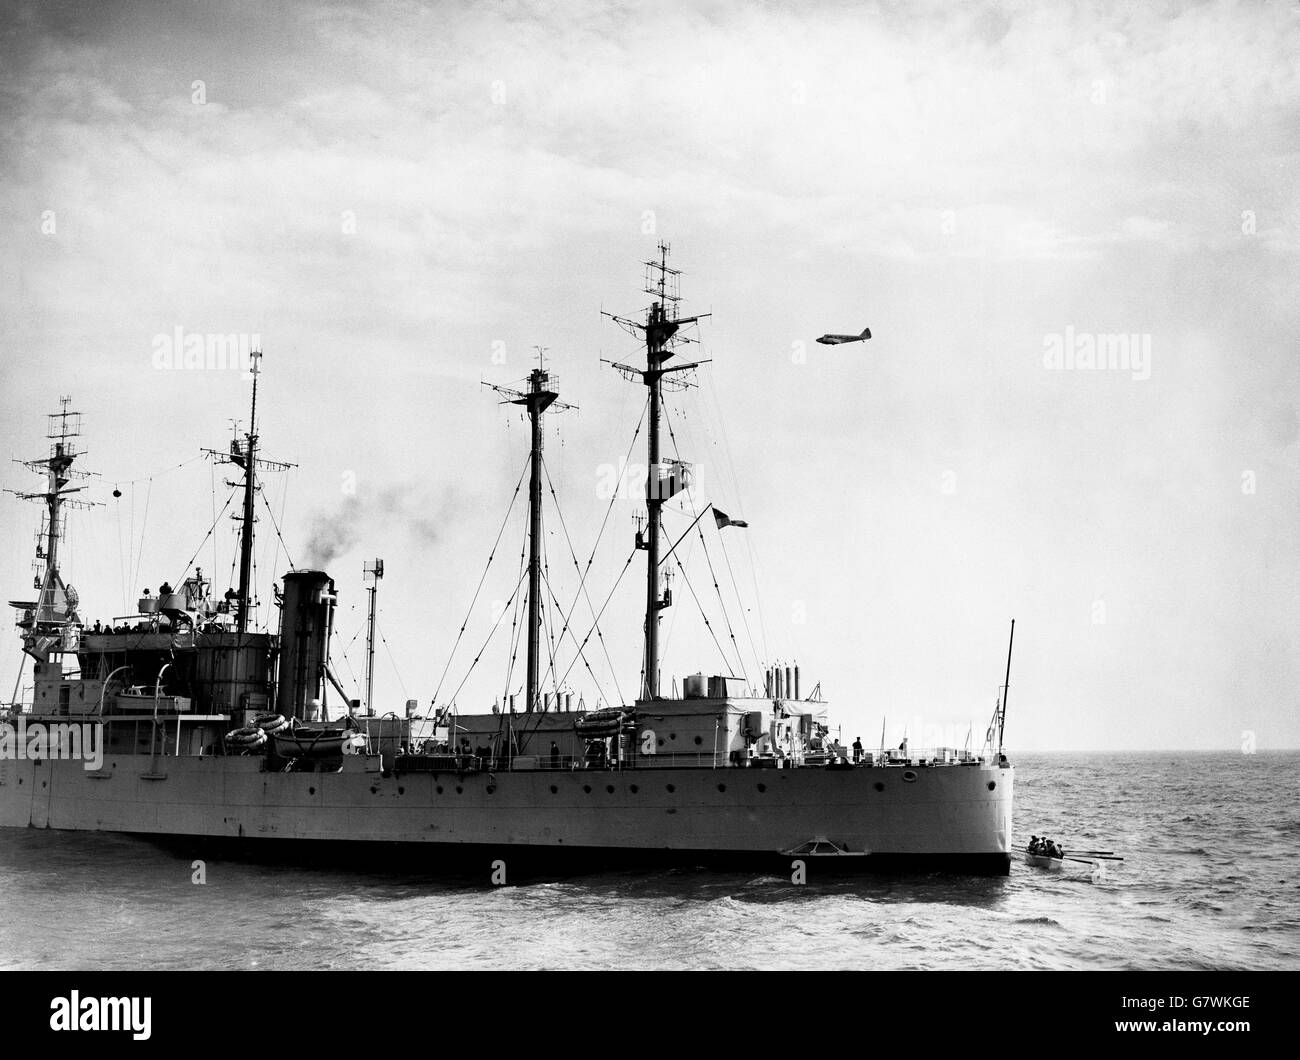 An aircraft passes the Royal Navy radar ship HMS Boxer, during the search for sunken submarine HMS Affray. The Boxer is at the centre of the search operations in the English Channel for the exact position of the Affray, and for any survivors who may have left the submarine by means of their escape apparatus. The Affray had 75 men on board. Stock Photo